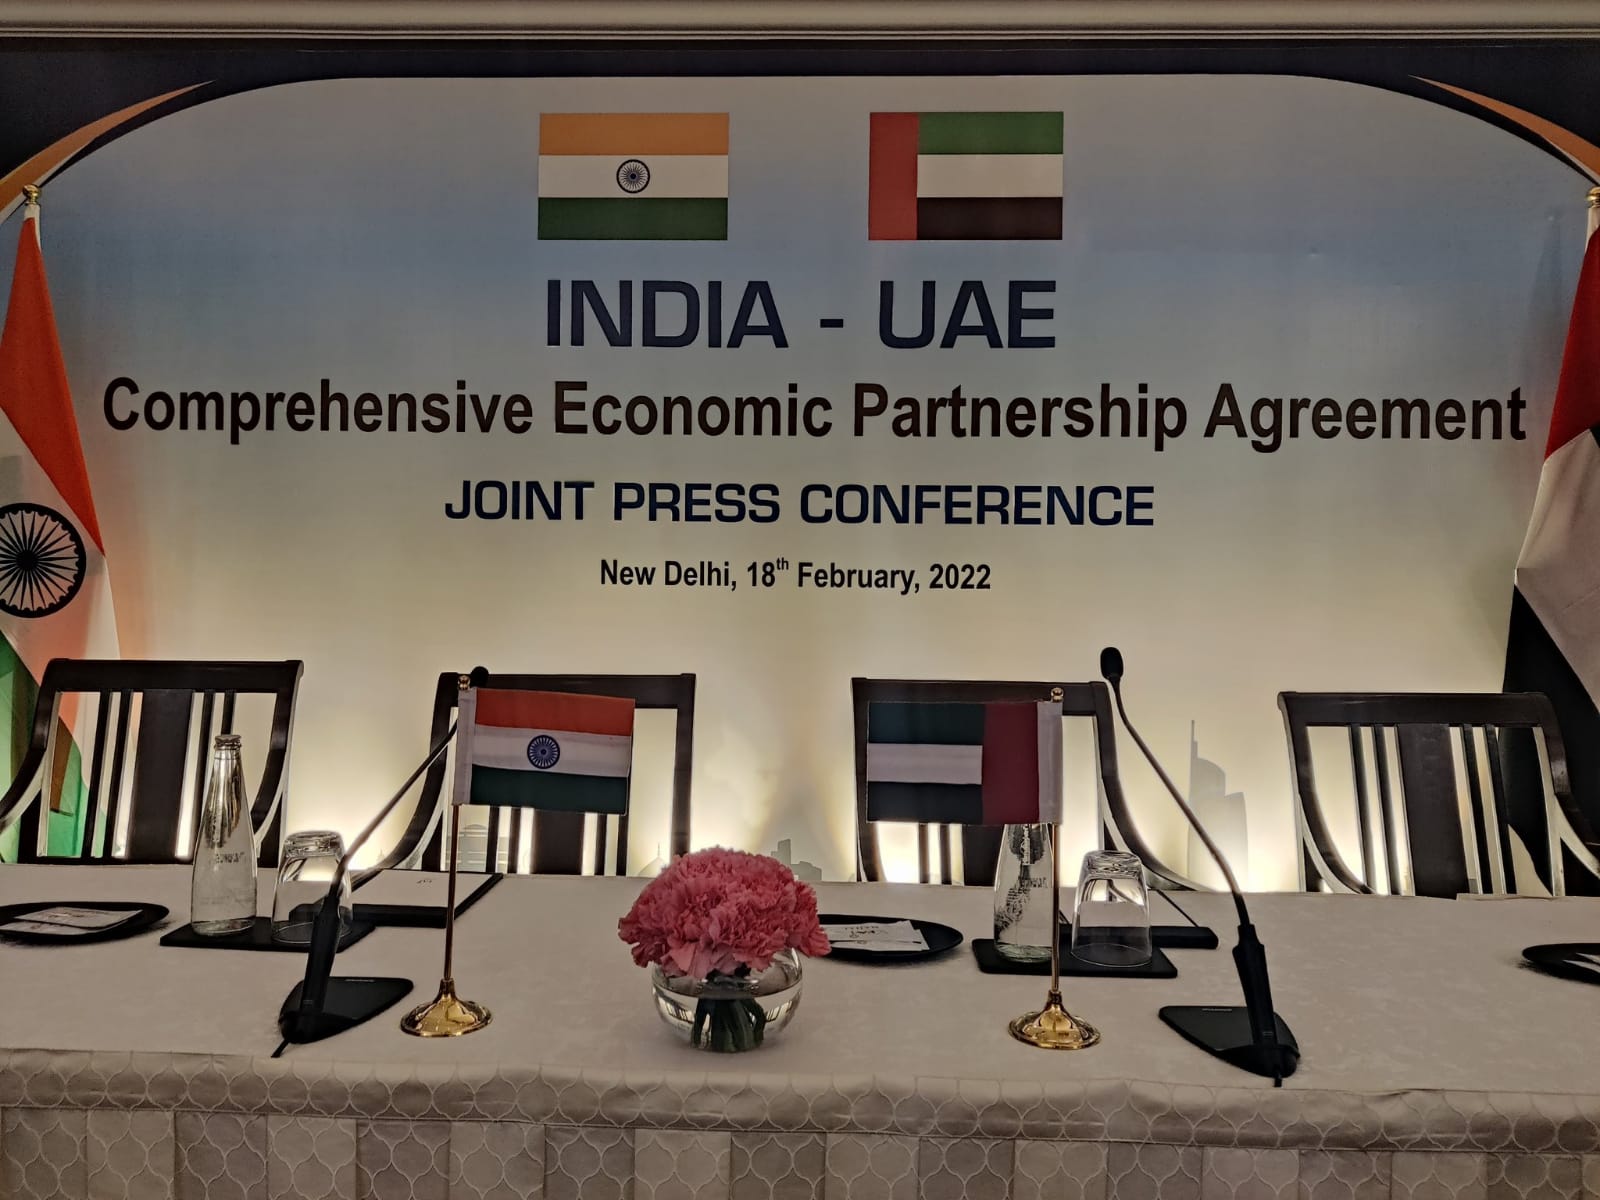 India, UAE trade pact: Technical council on investment, trade promotion, facilitation to be set up